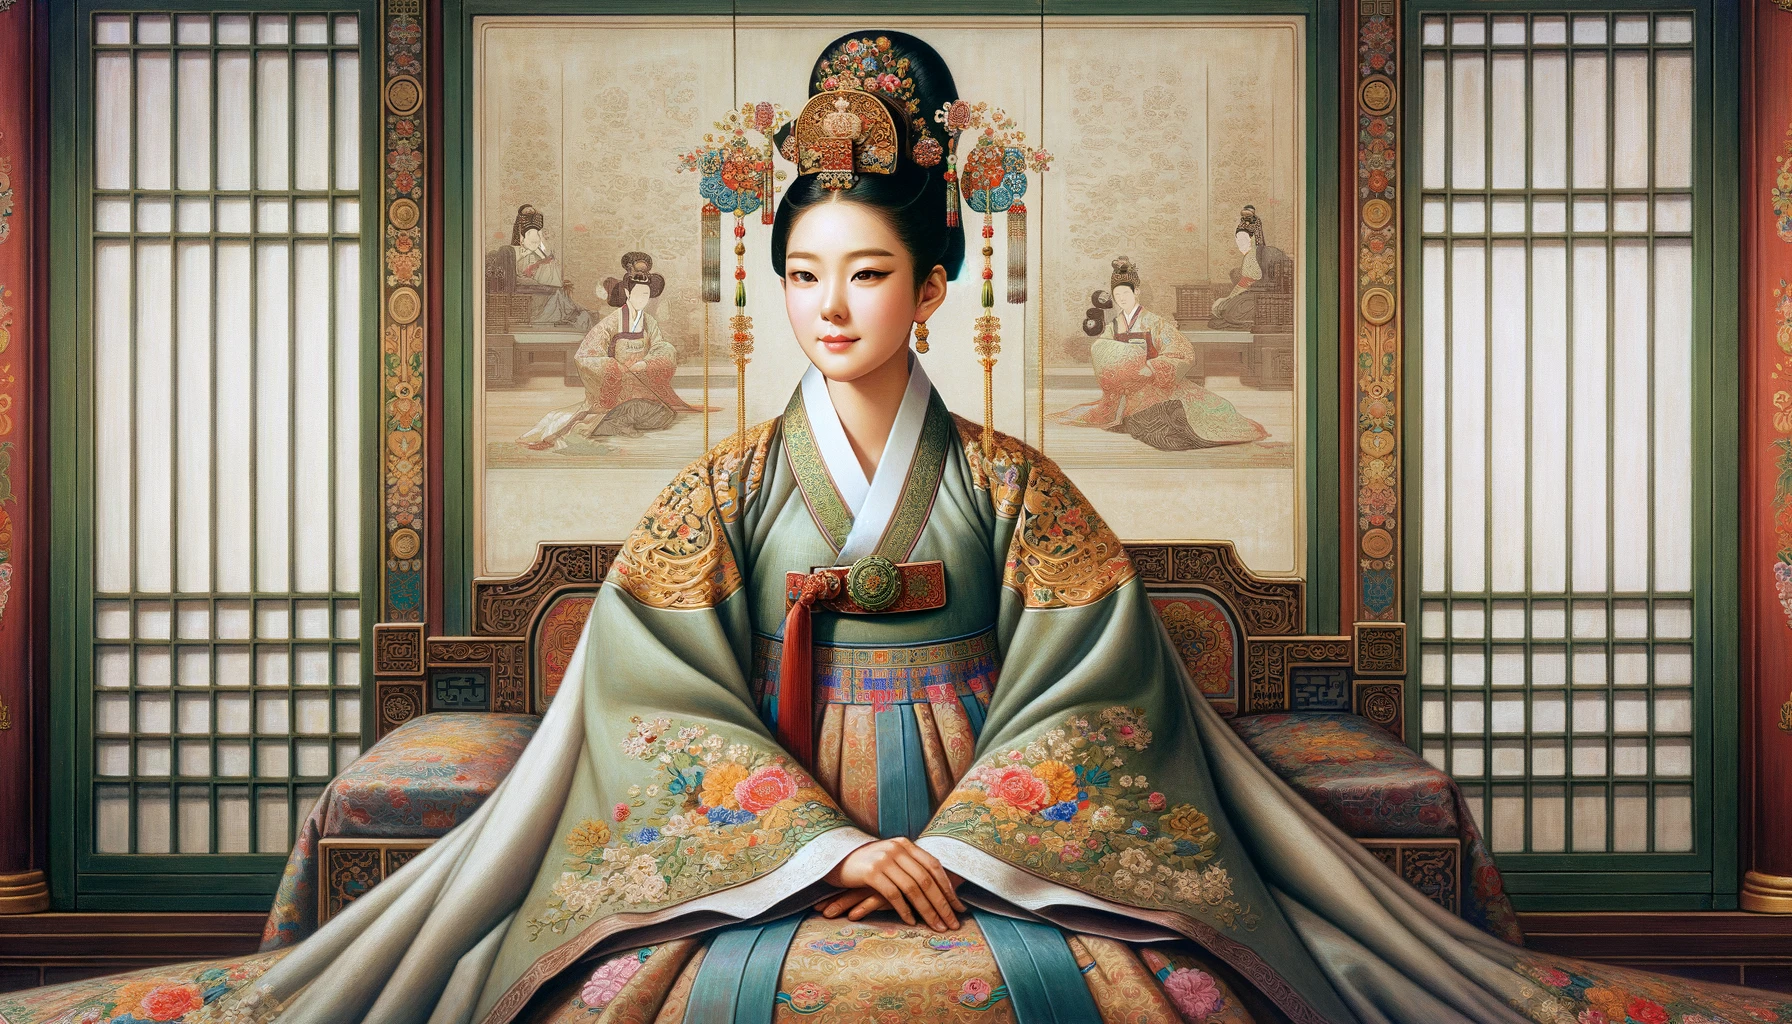 queen munjeong joseon dynasty image depiction